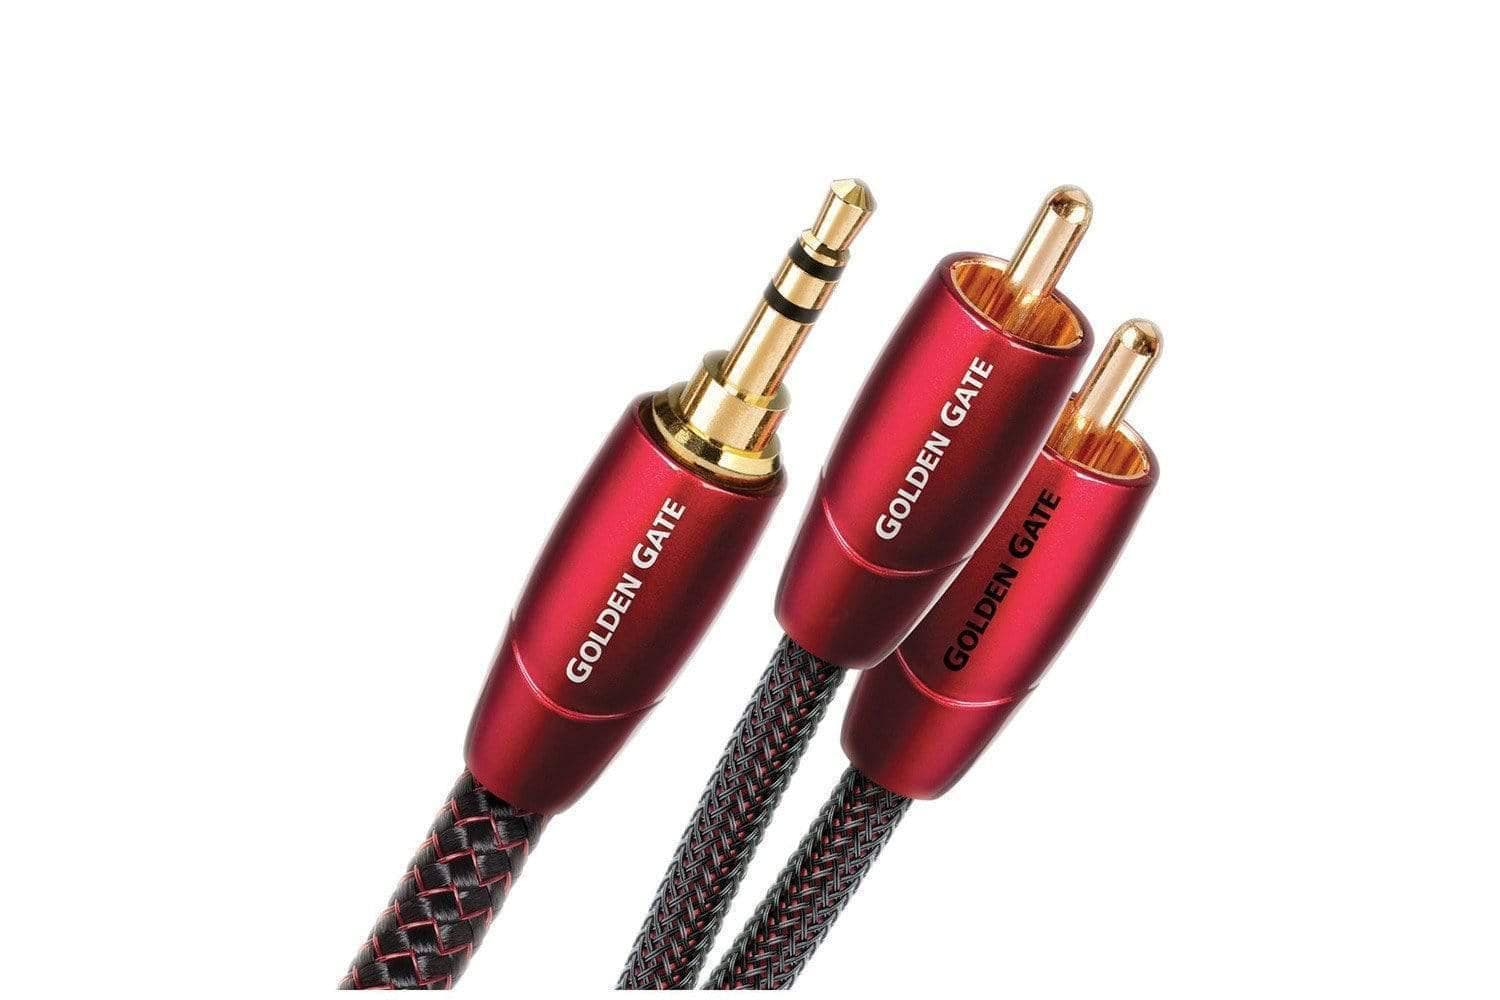 AudioQuest Golden Gate Series 3.5mm to RCA